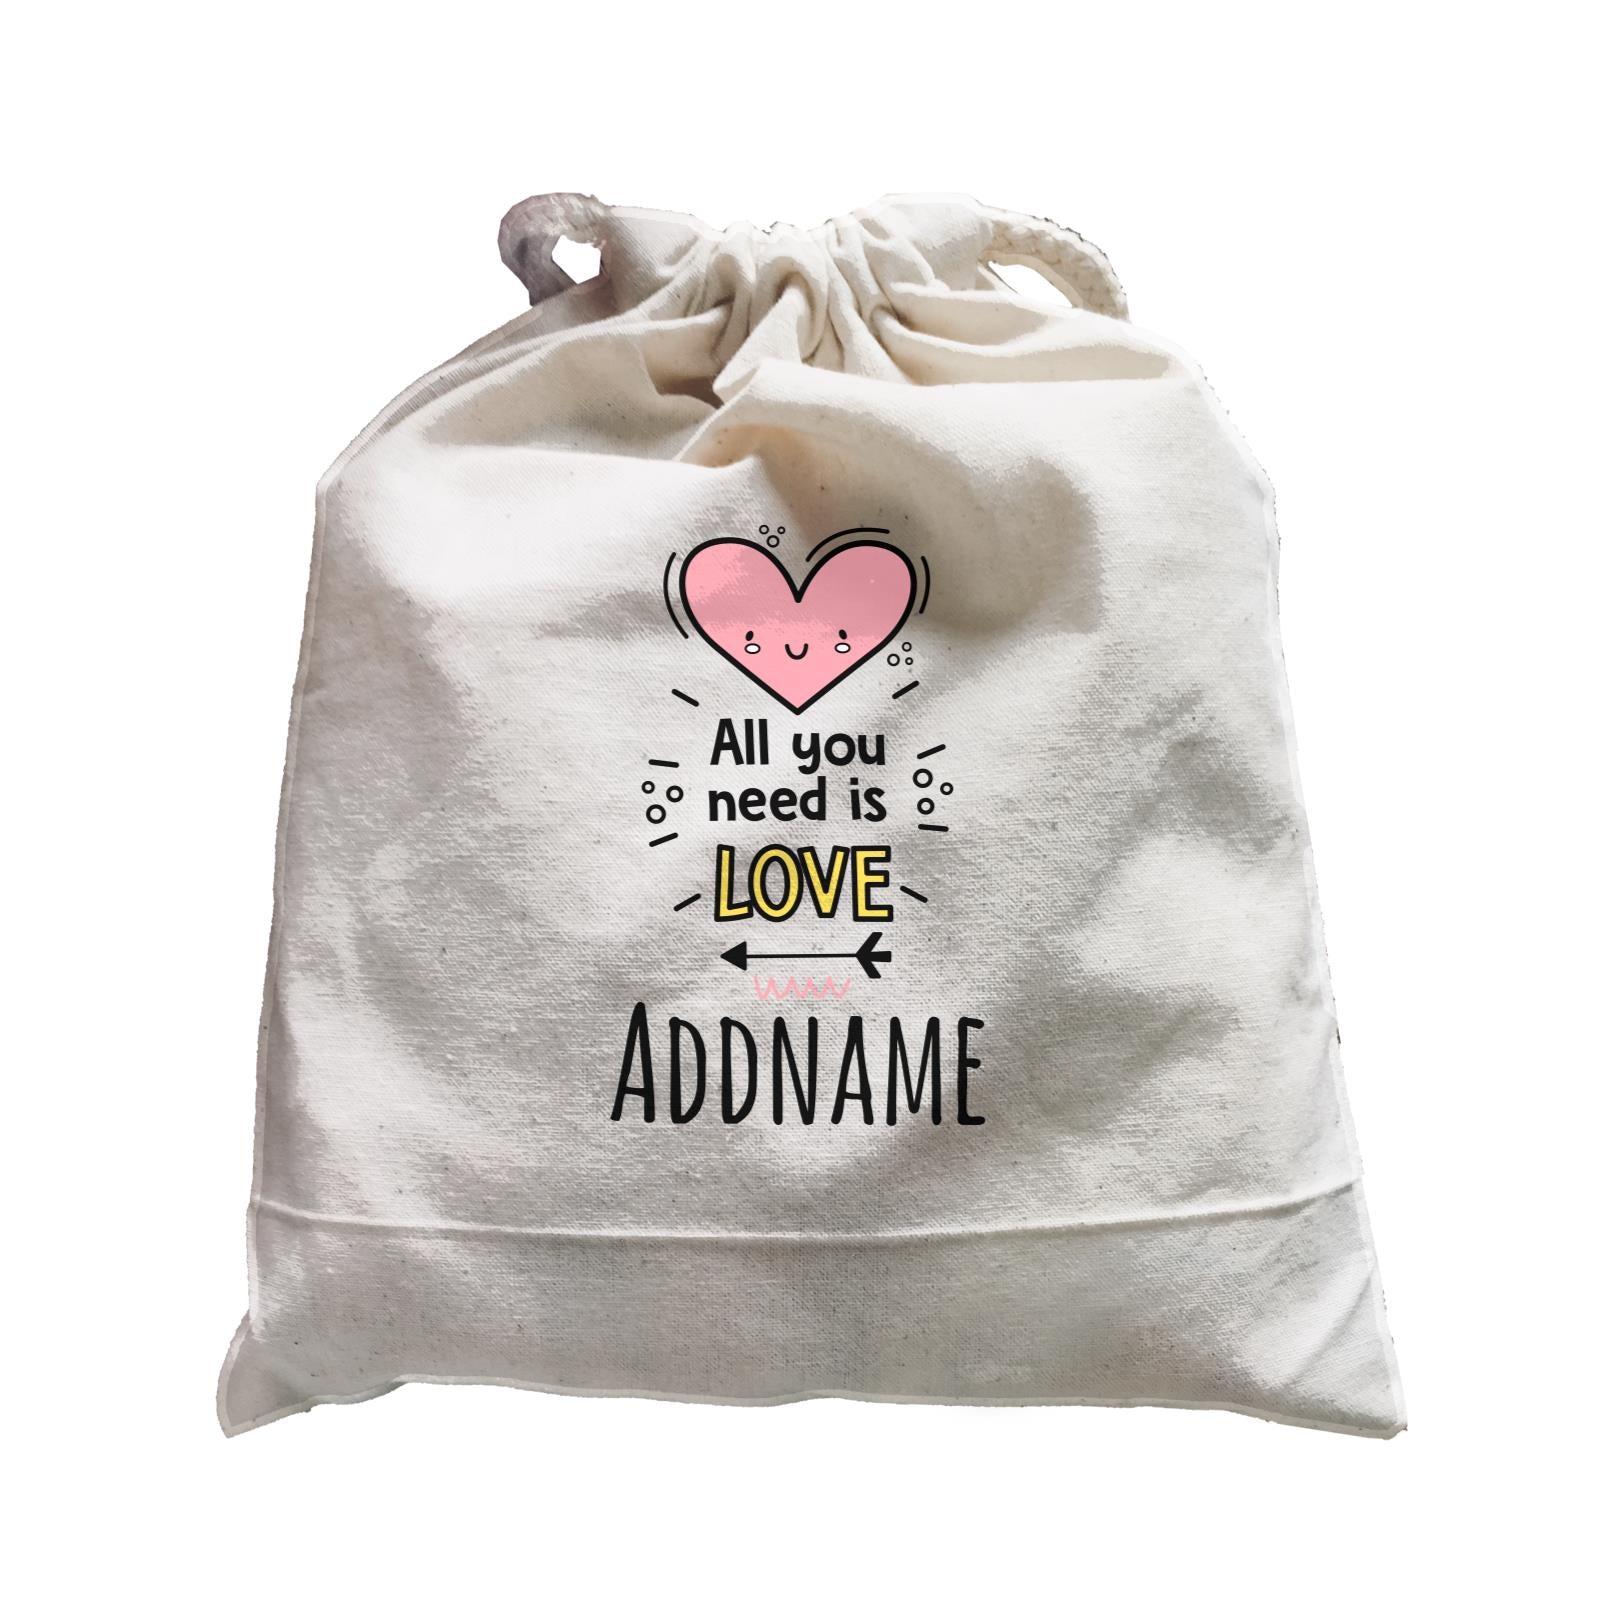 Drawn Baby Elements All You Need Is Love Addname Satchel